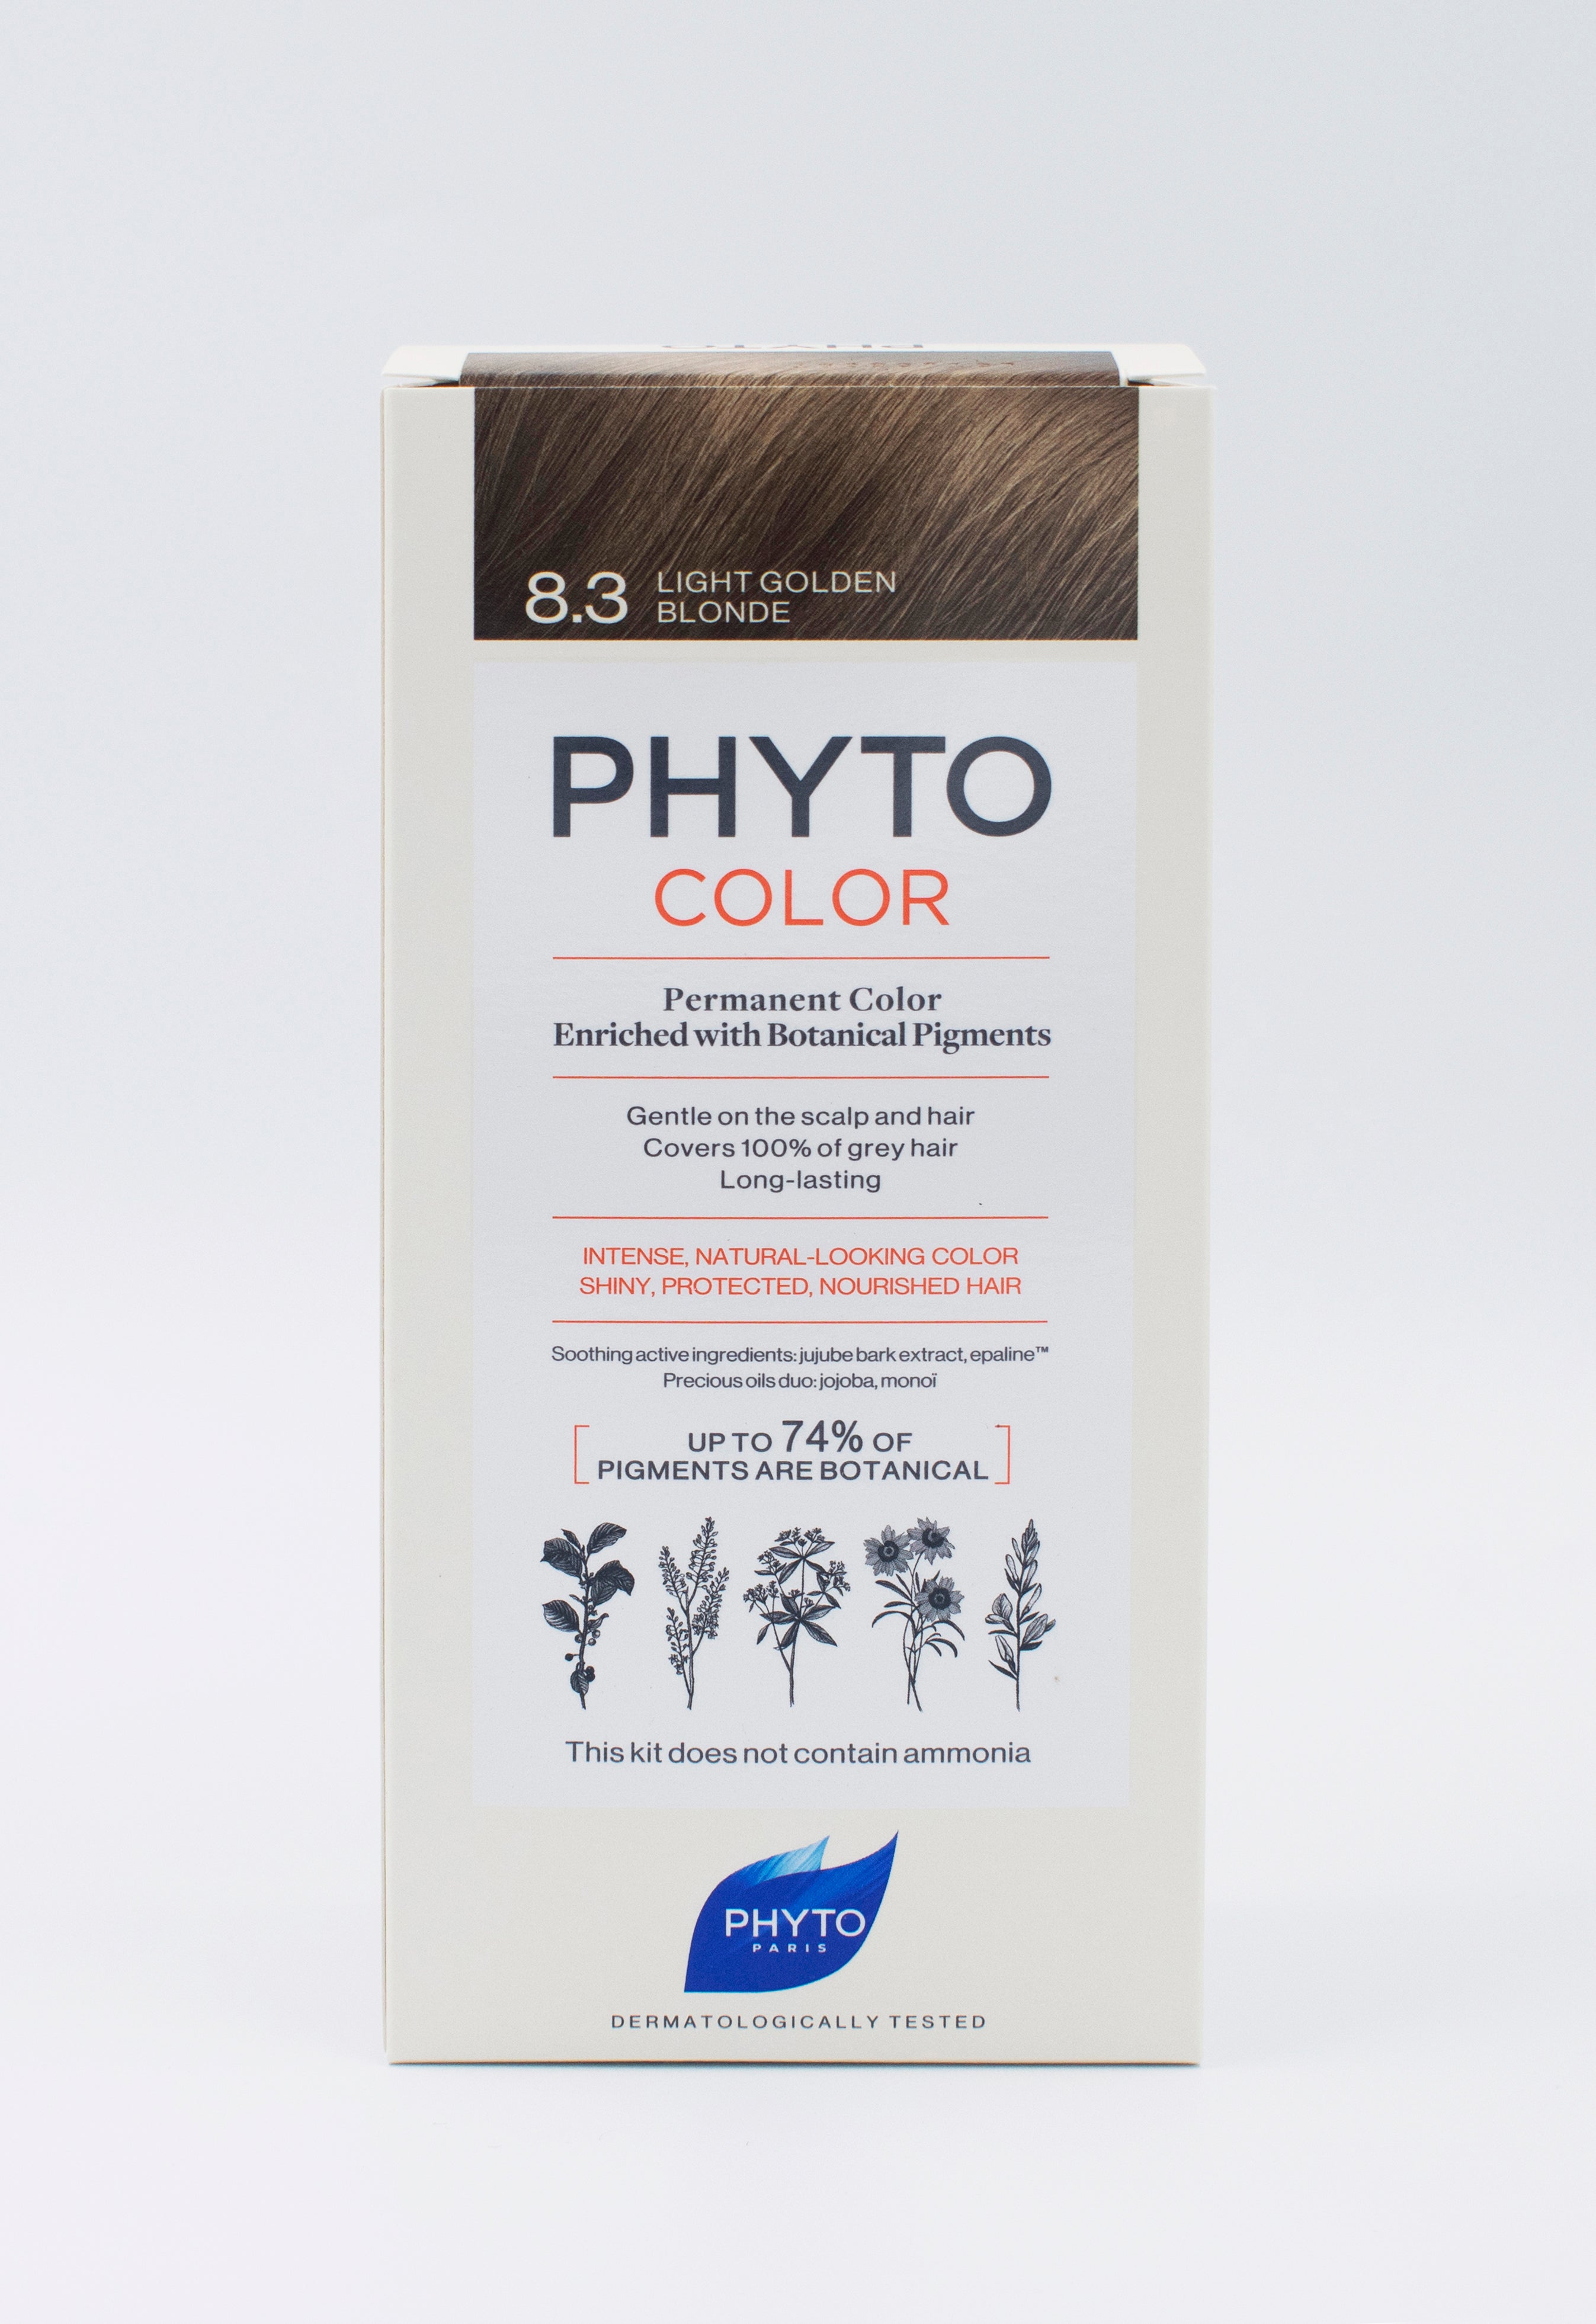 Phyto - Phytocolor 8.3 Light Golden Blonde Permanent Coloring